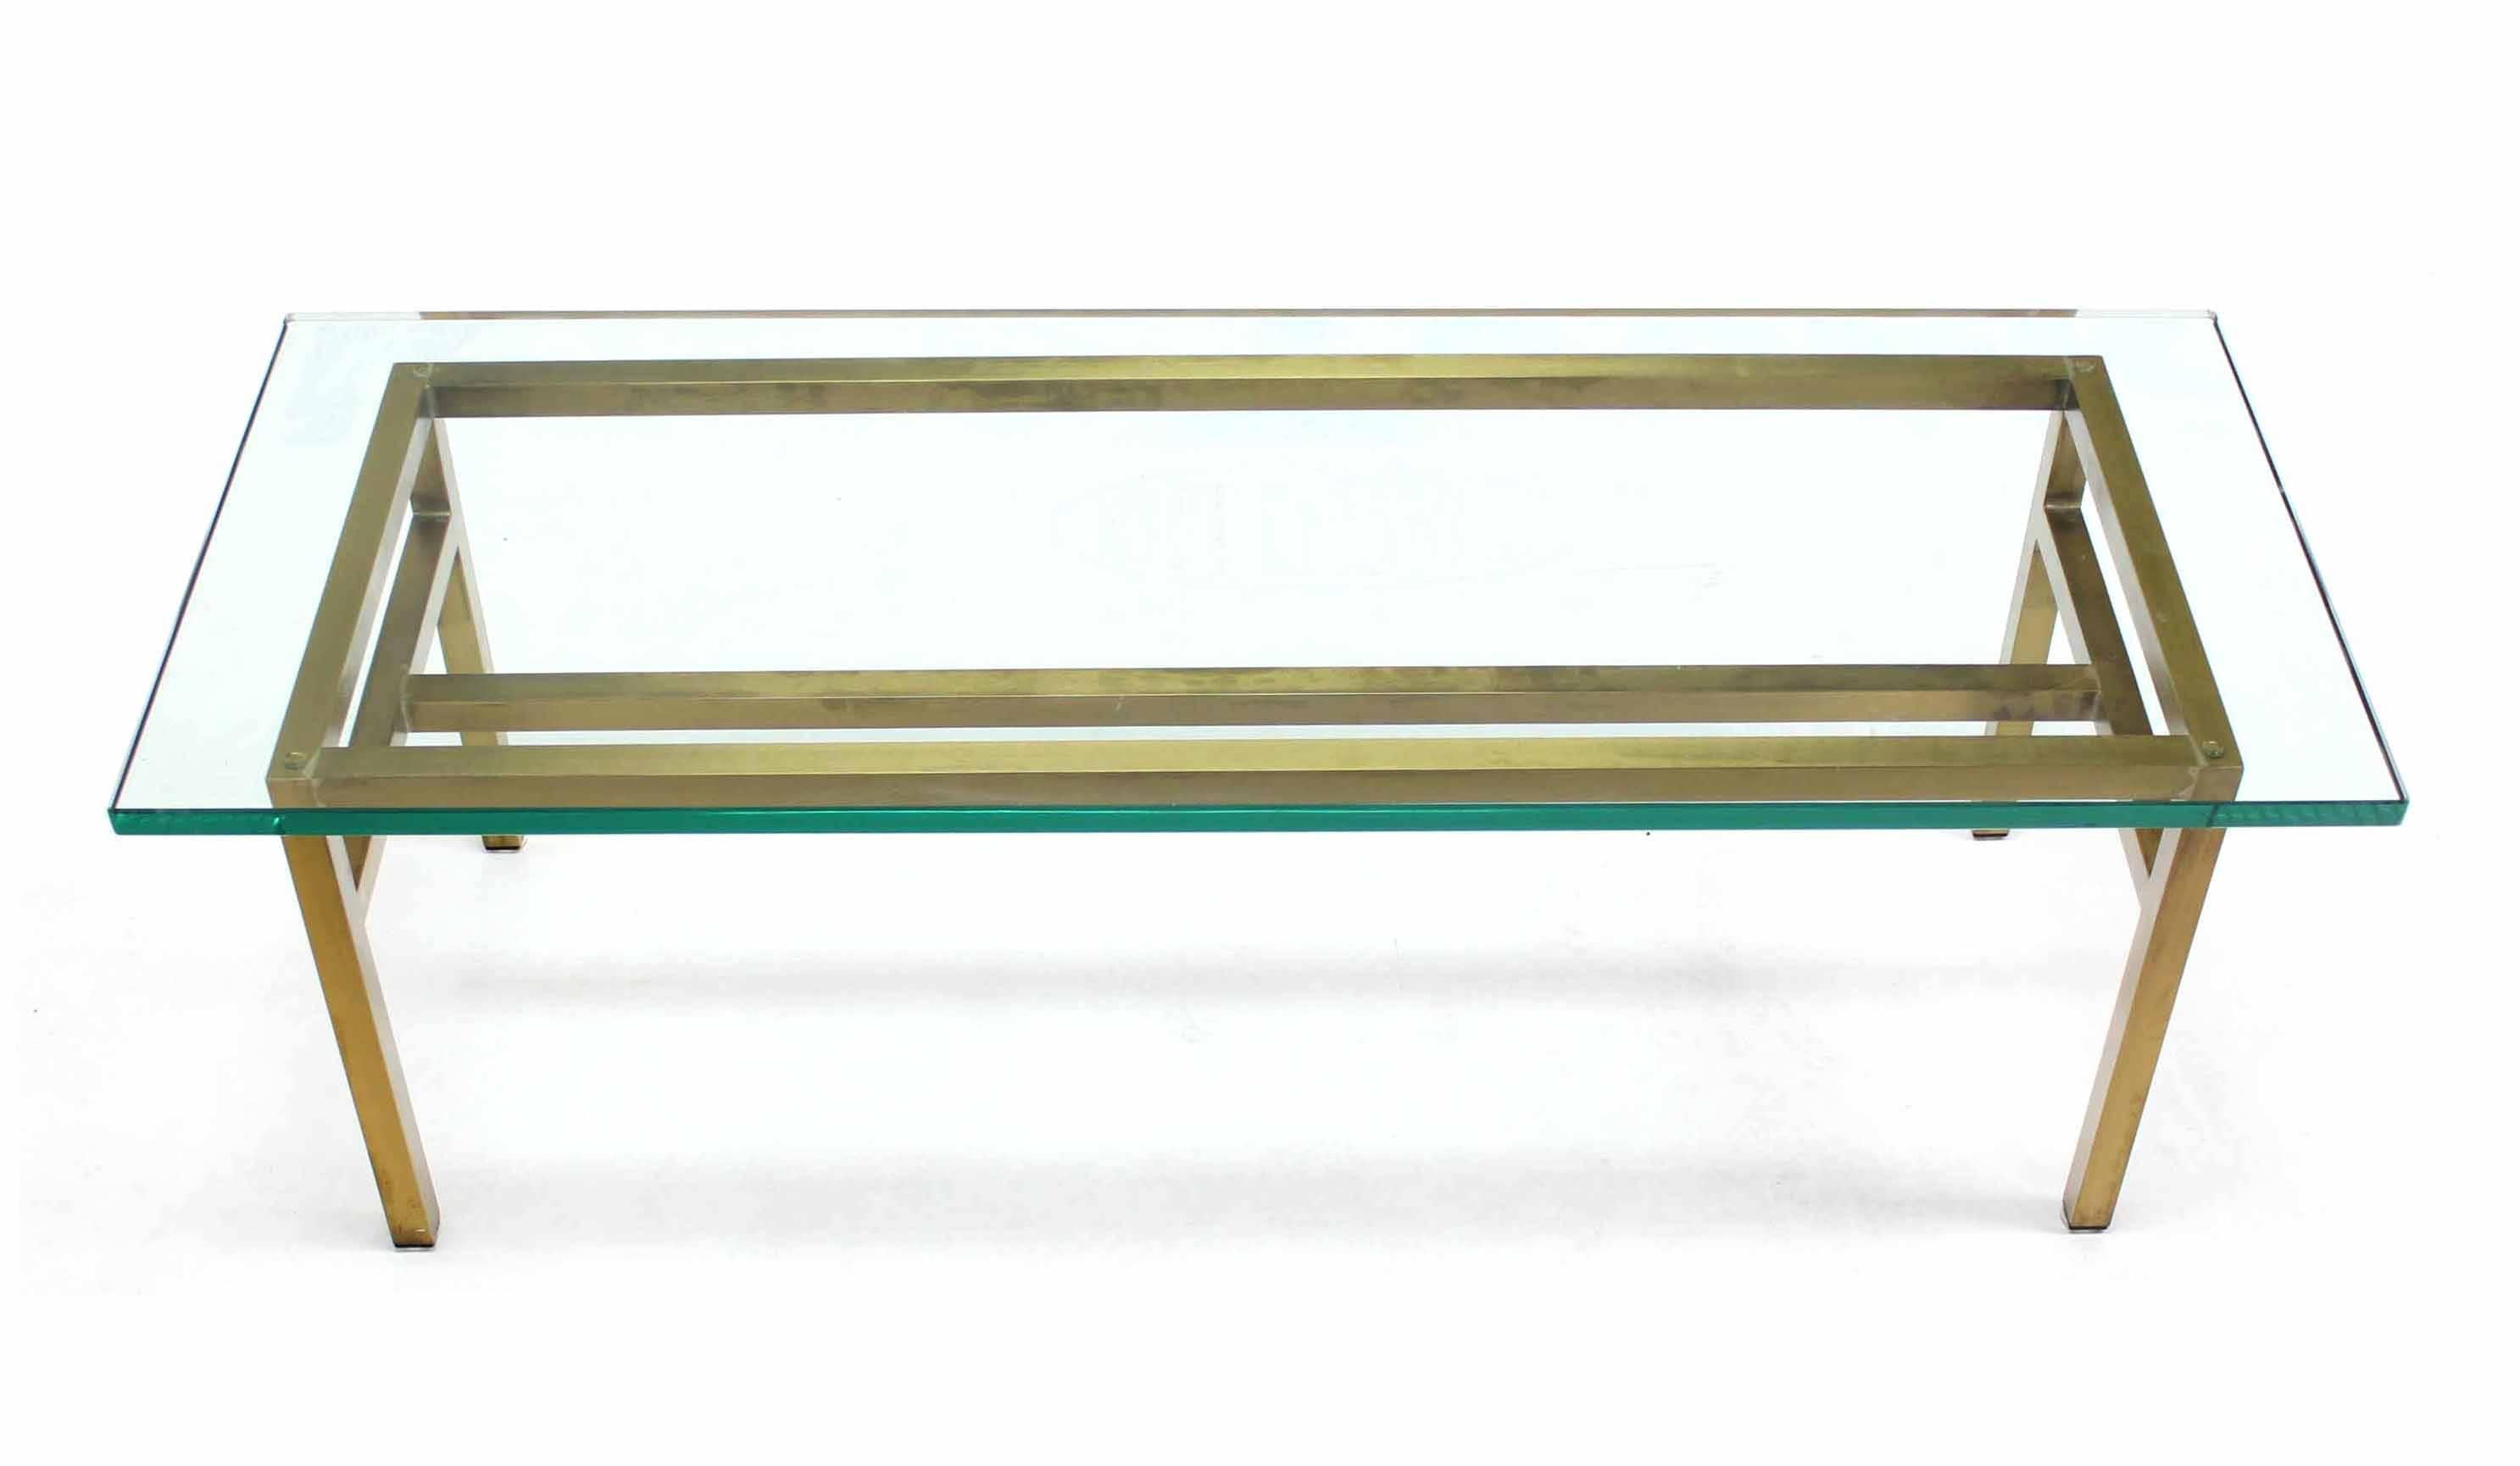 American Soldered Square Solid Brass Bar Rectangular Coffee Table Thick Glass Top